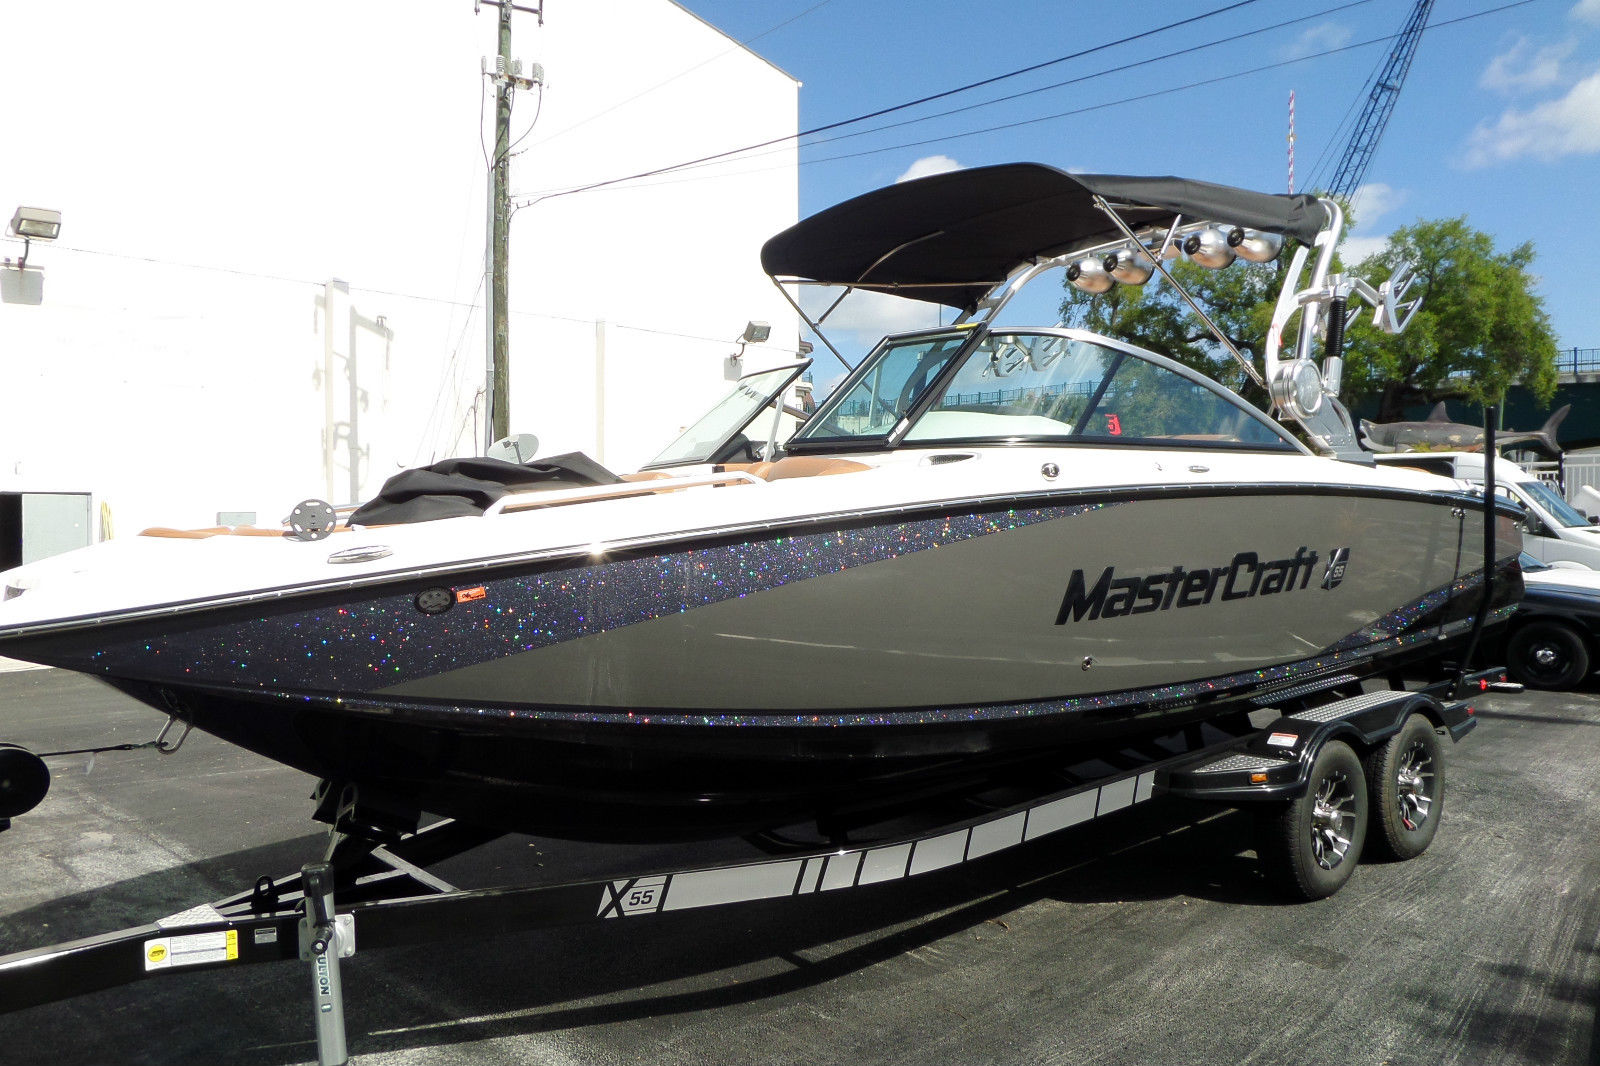 MasterCraft X55 2015 for sale for $129,950 - Boats-from ...